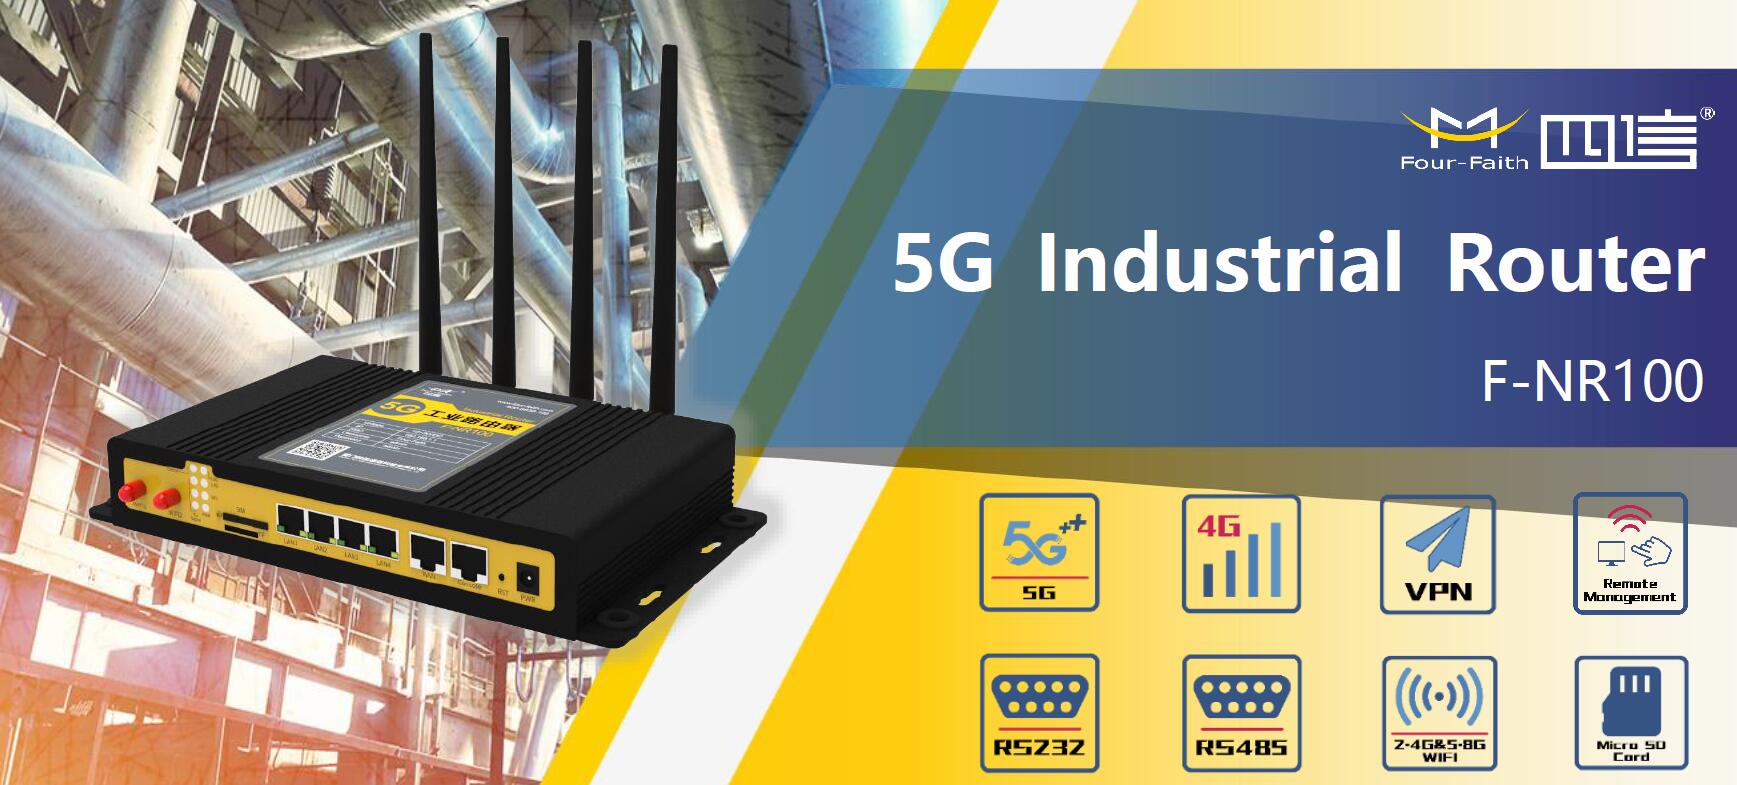 5G Industrial Router